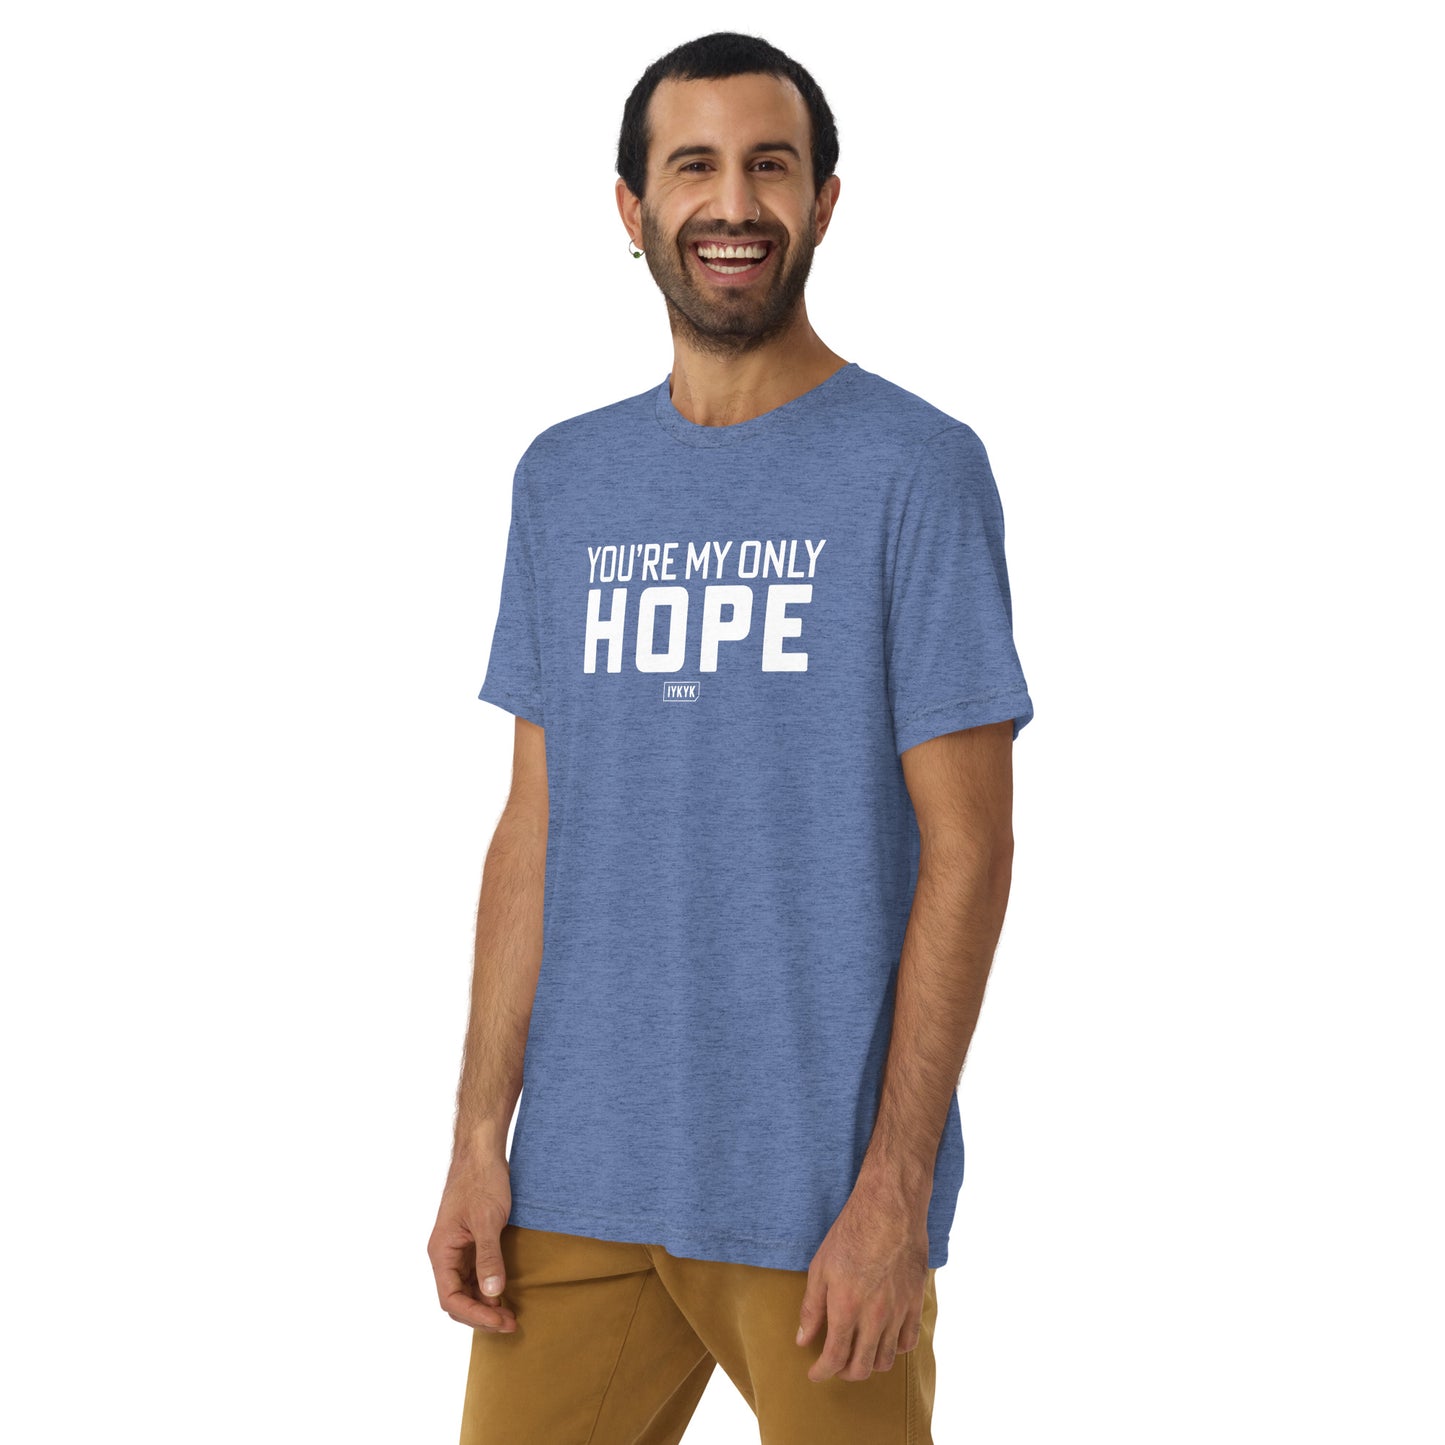 Premium Everyday You're My Only Hope Star Wars Tee